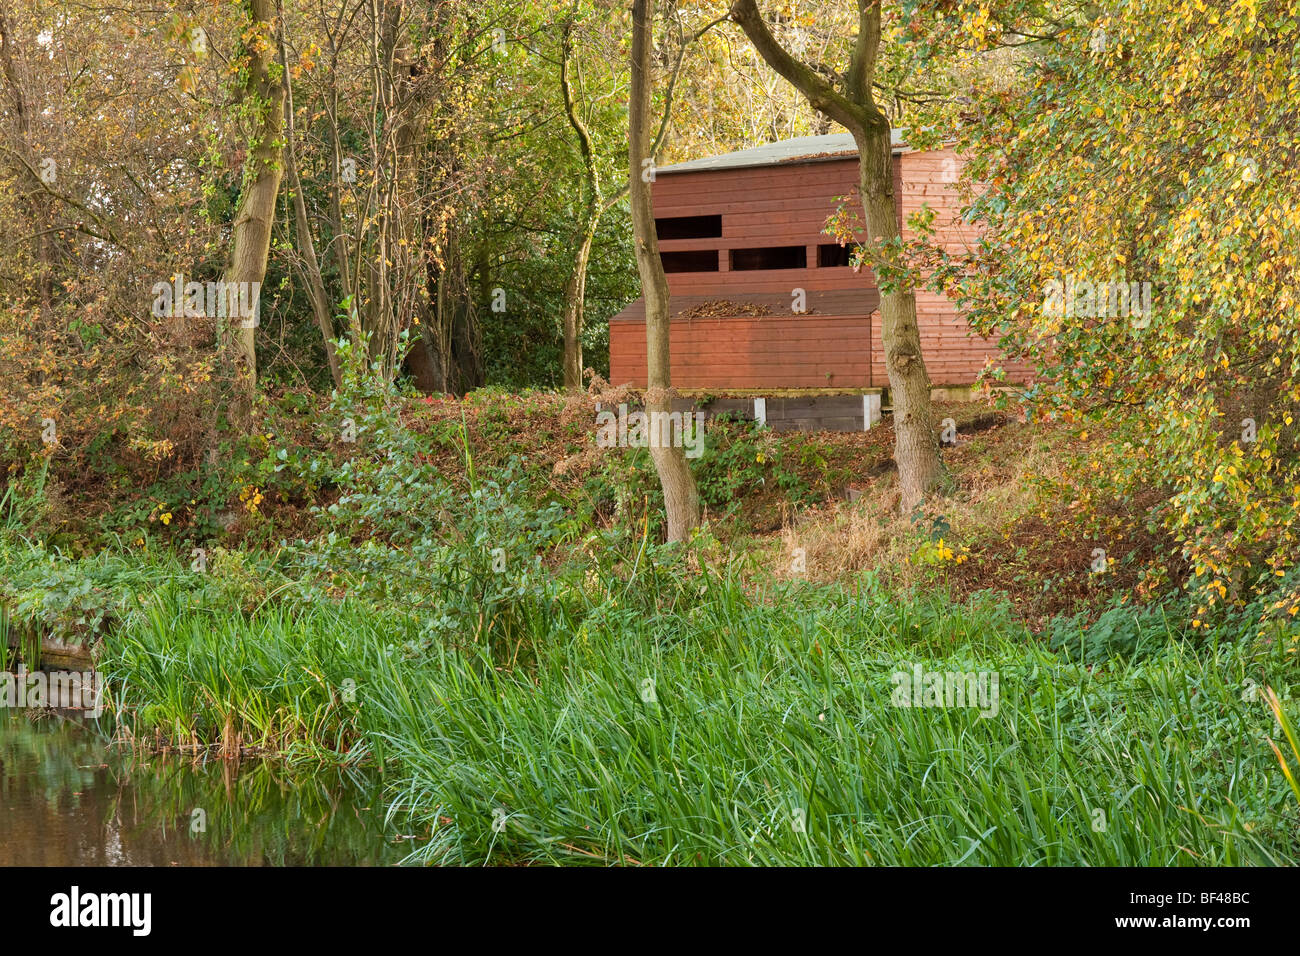 'Bird hide' overlooking a small pool Stock Photo